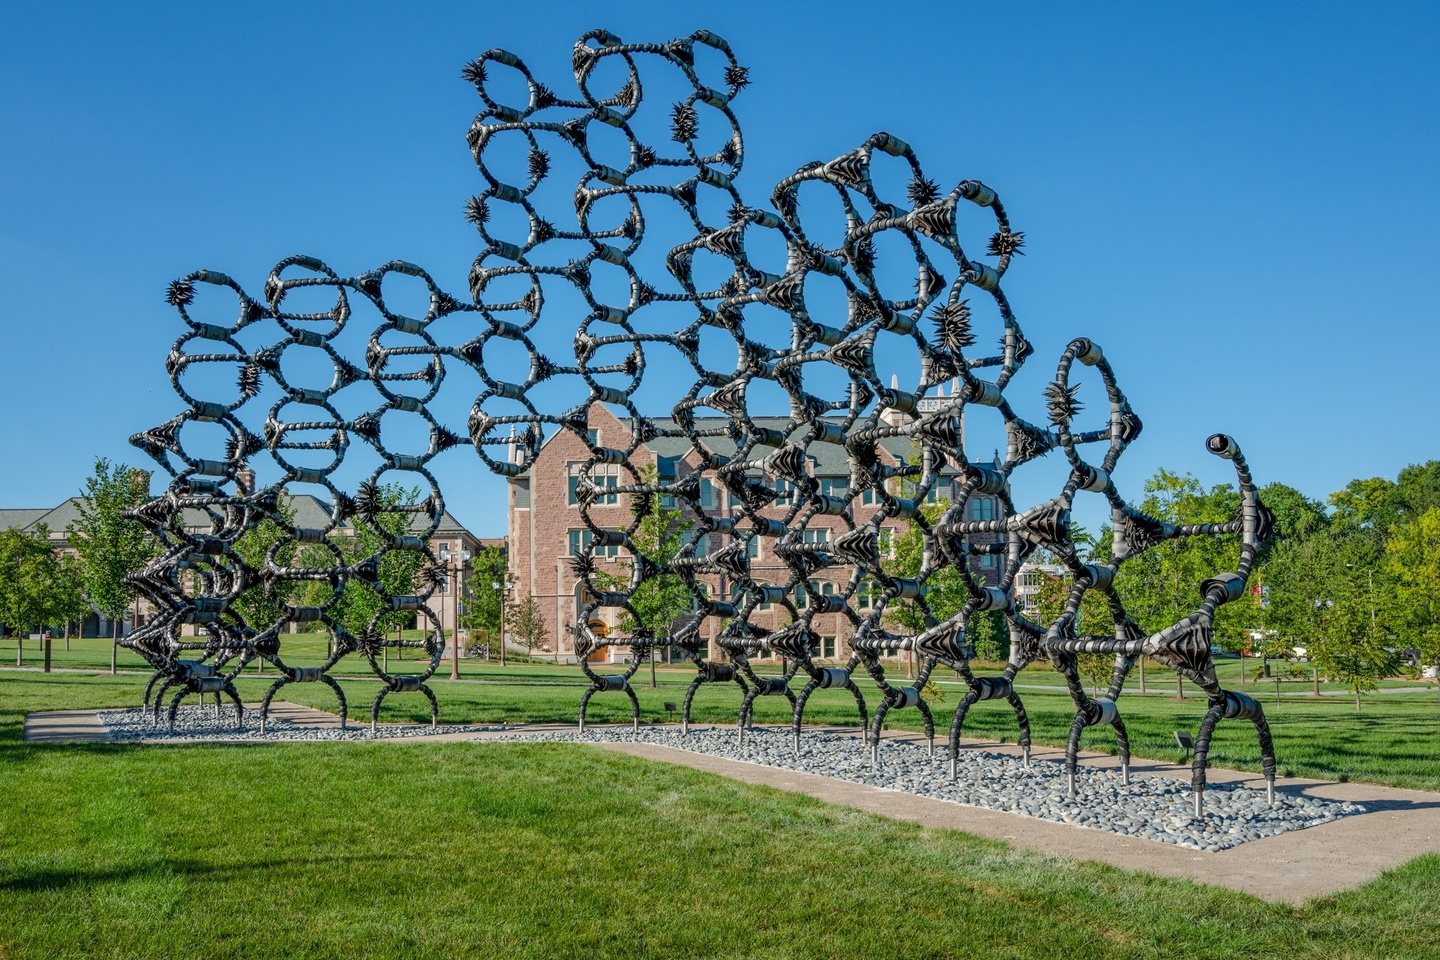 A large, outdoor sculpture composed of circular modules made of pieces of rubber tires